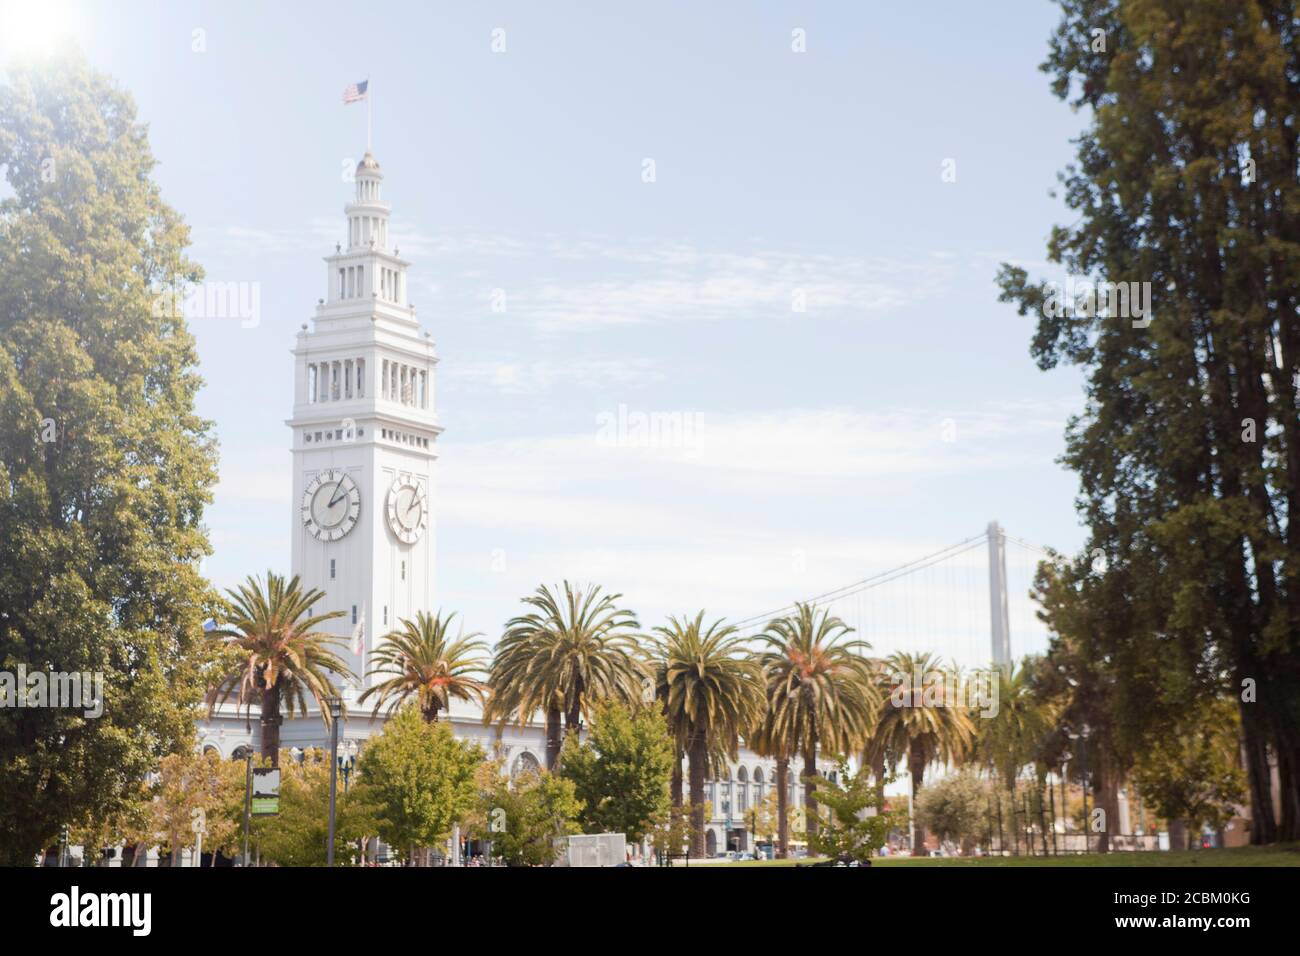 View of clock tower in Port of San Francisco, California, USA Stock Photo